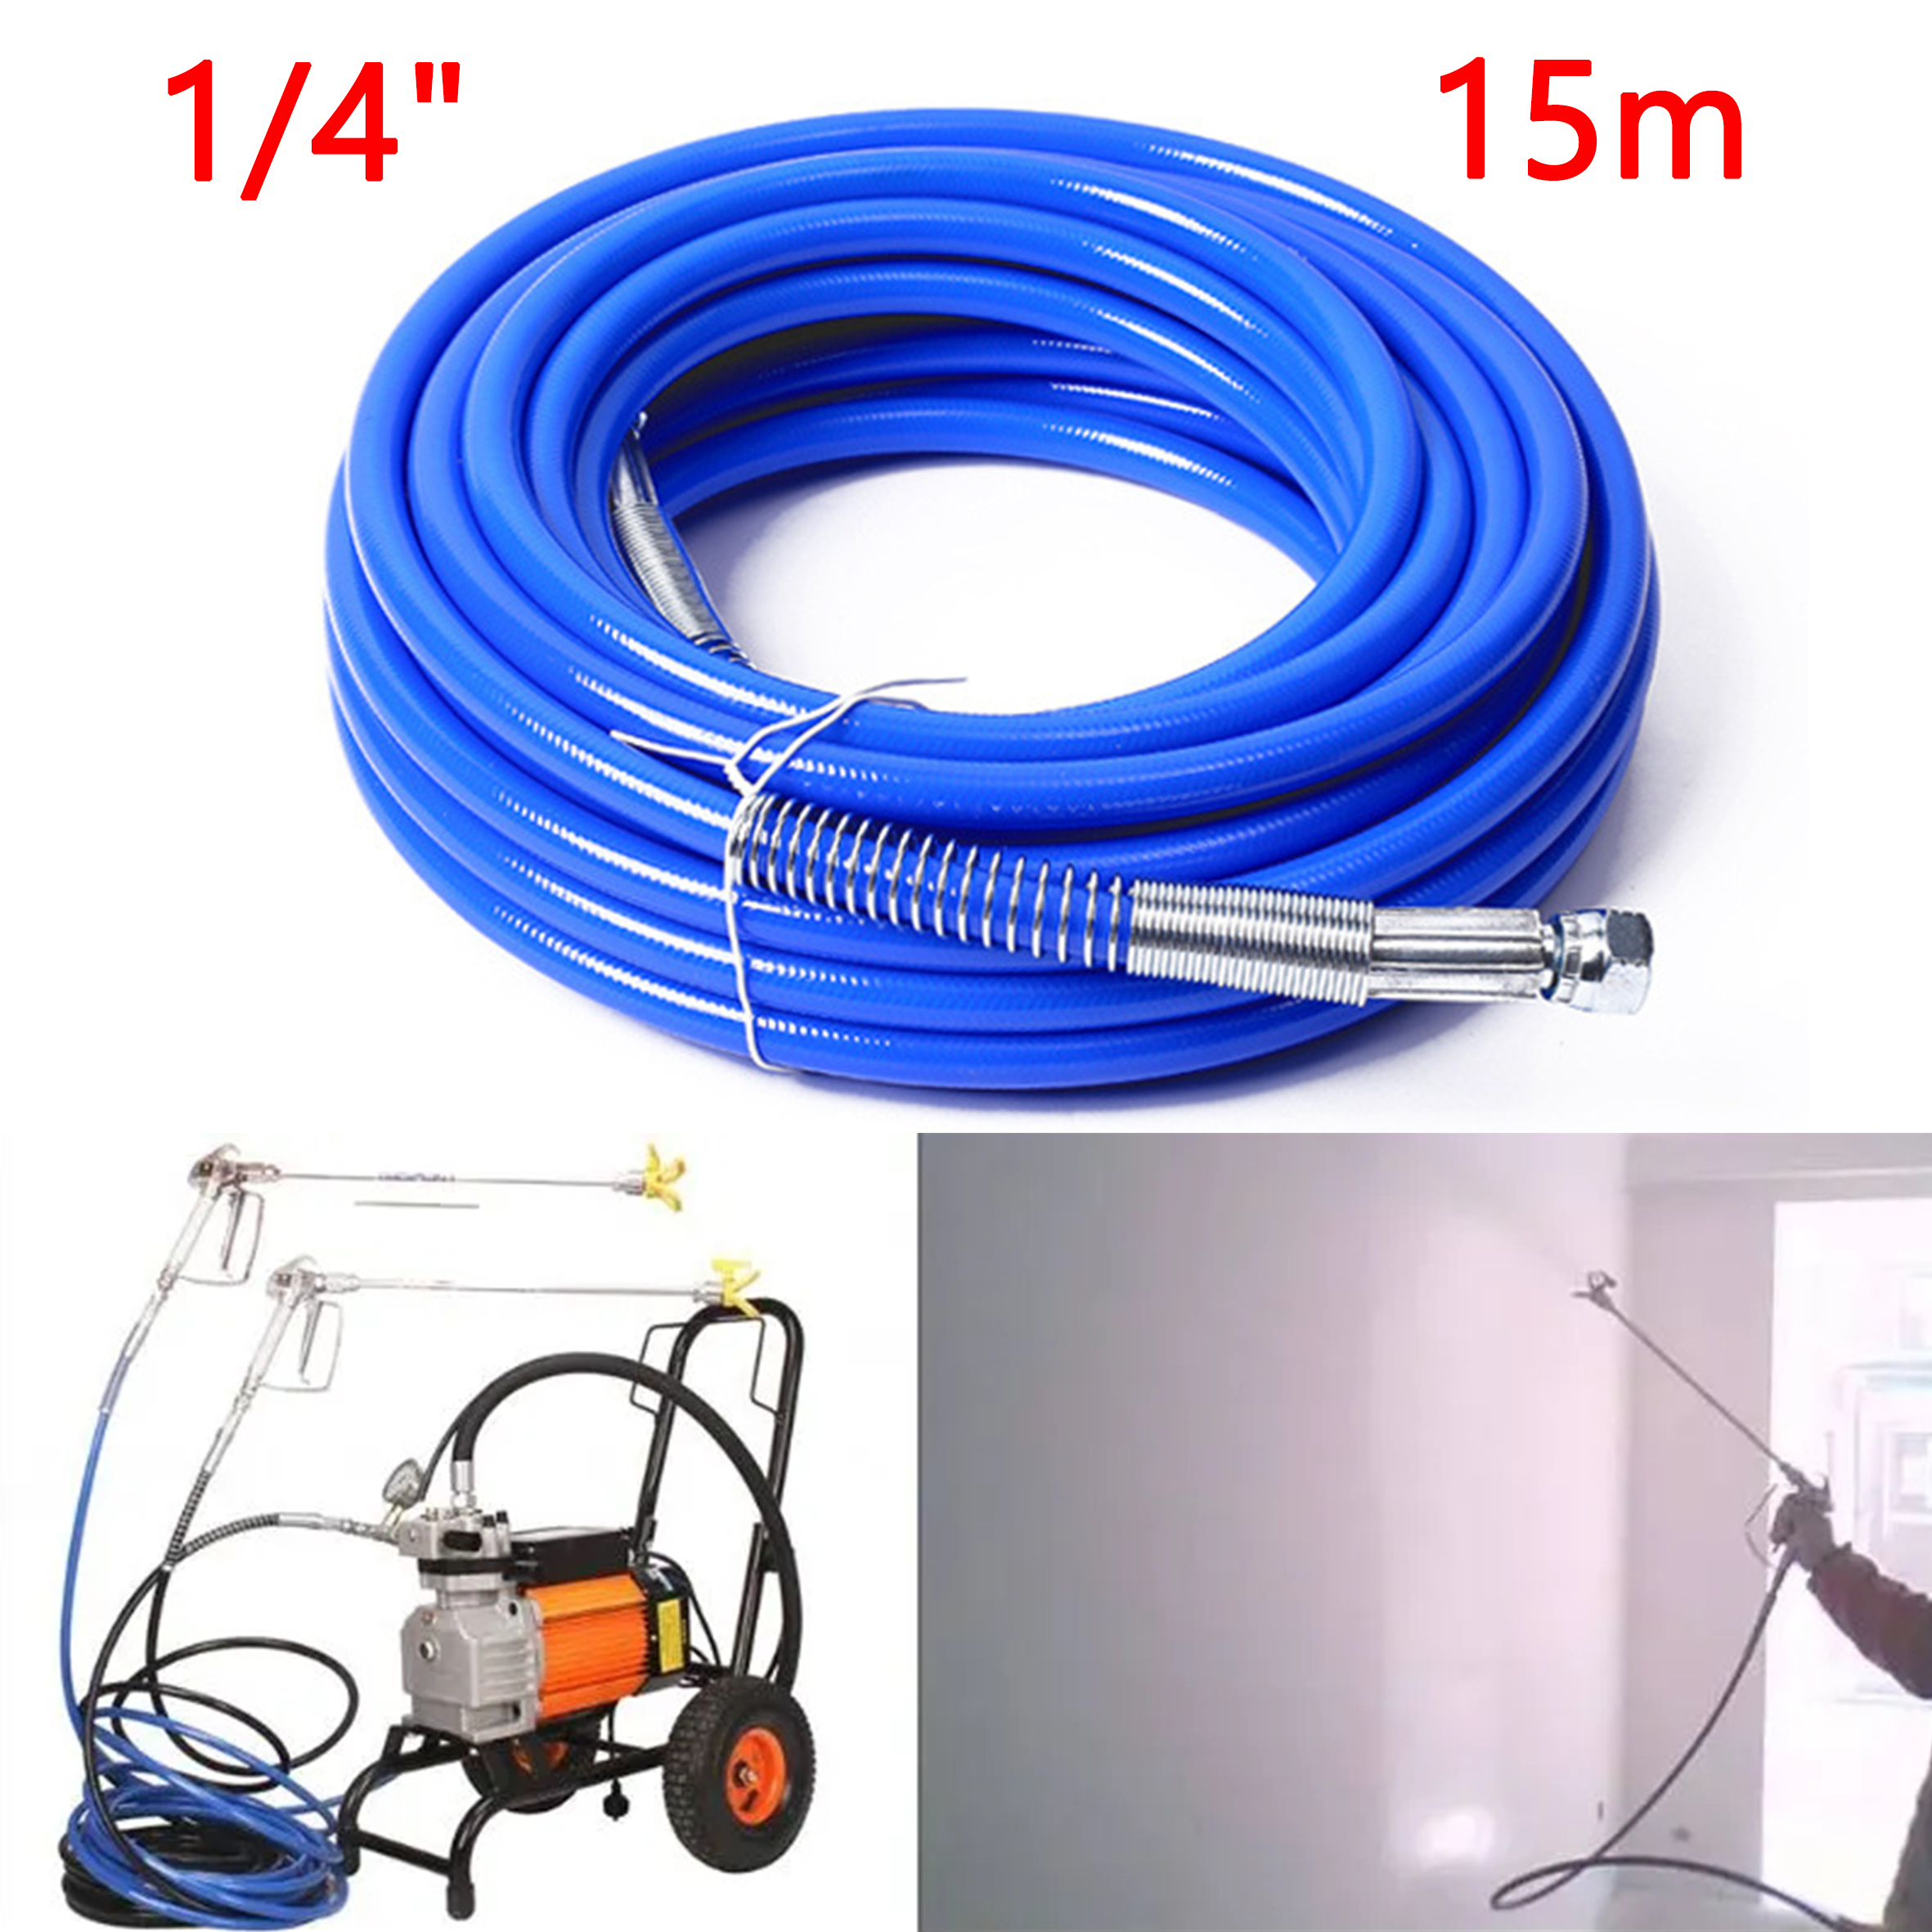 High Pressure Pipe 10M 5000Psi Airless Paint Hose 50 X 1 4inch Sprayer  Airless Paint Hose For Spray Tool Sprayer Water2690 From Yier63, $29.07